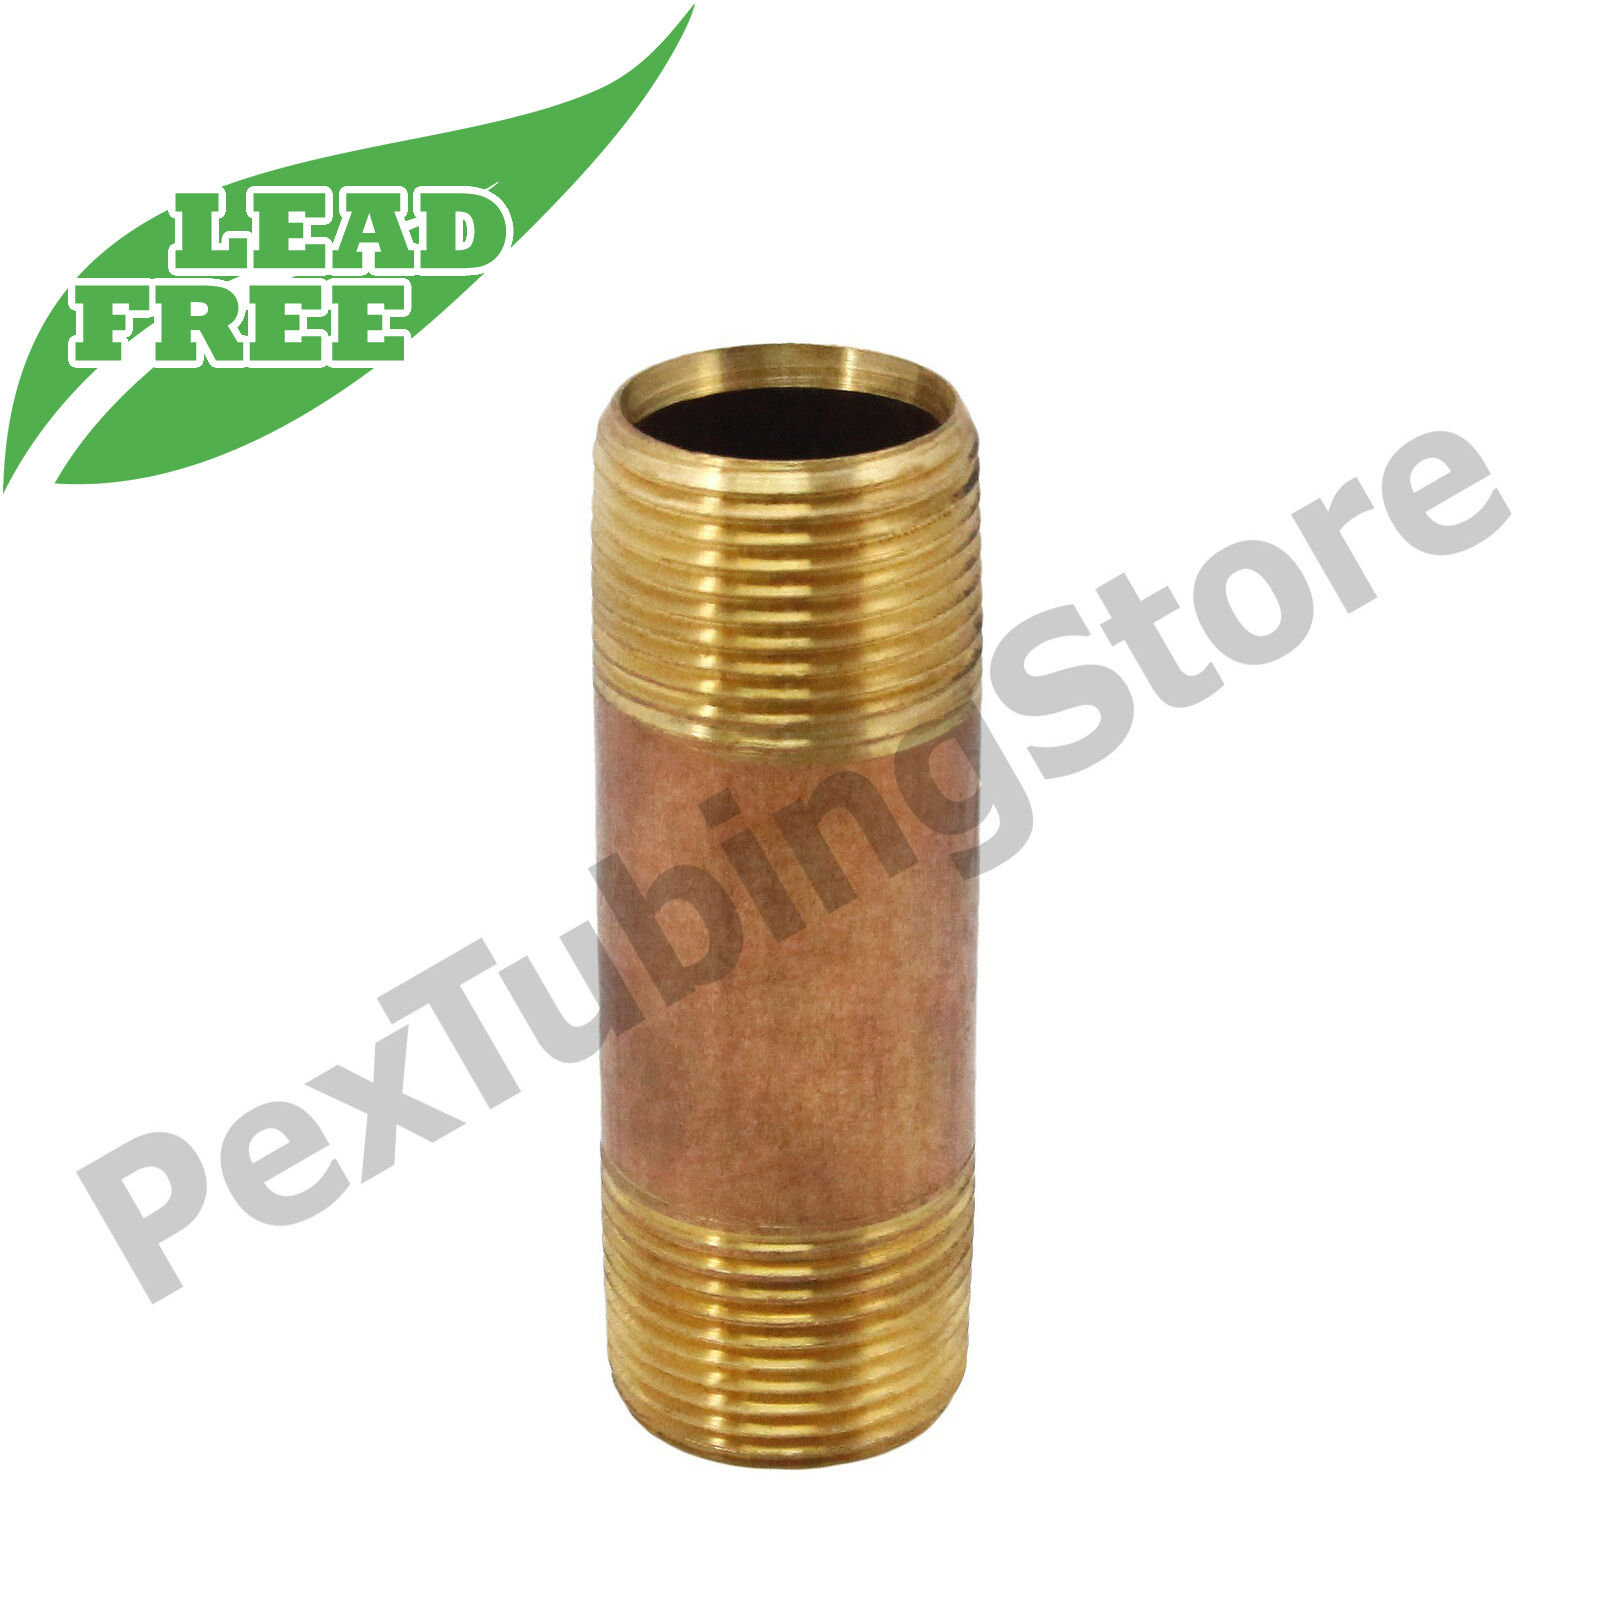 Brass Npt Threaded Pipe Nipple. Lead-free. Sizes 1/4", 1/2", 3/4", 1", Up To 2".